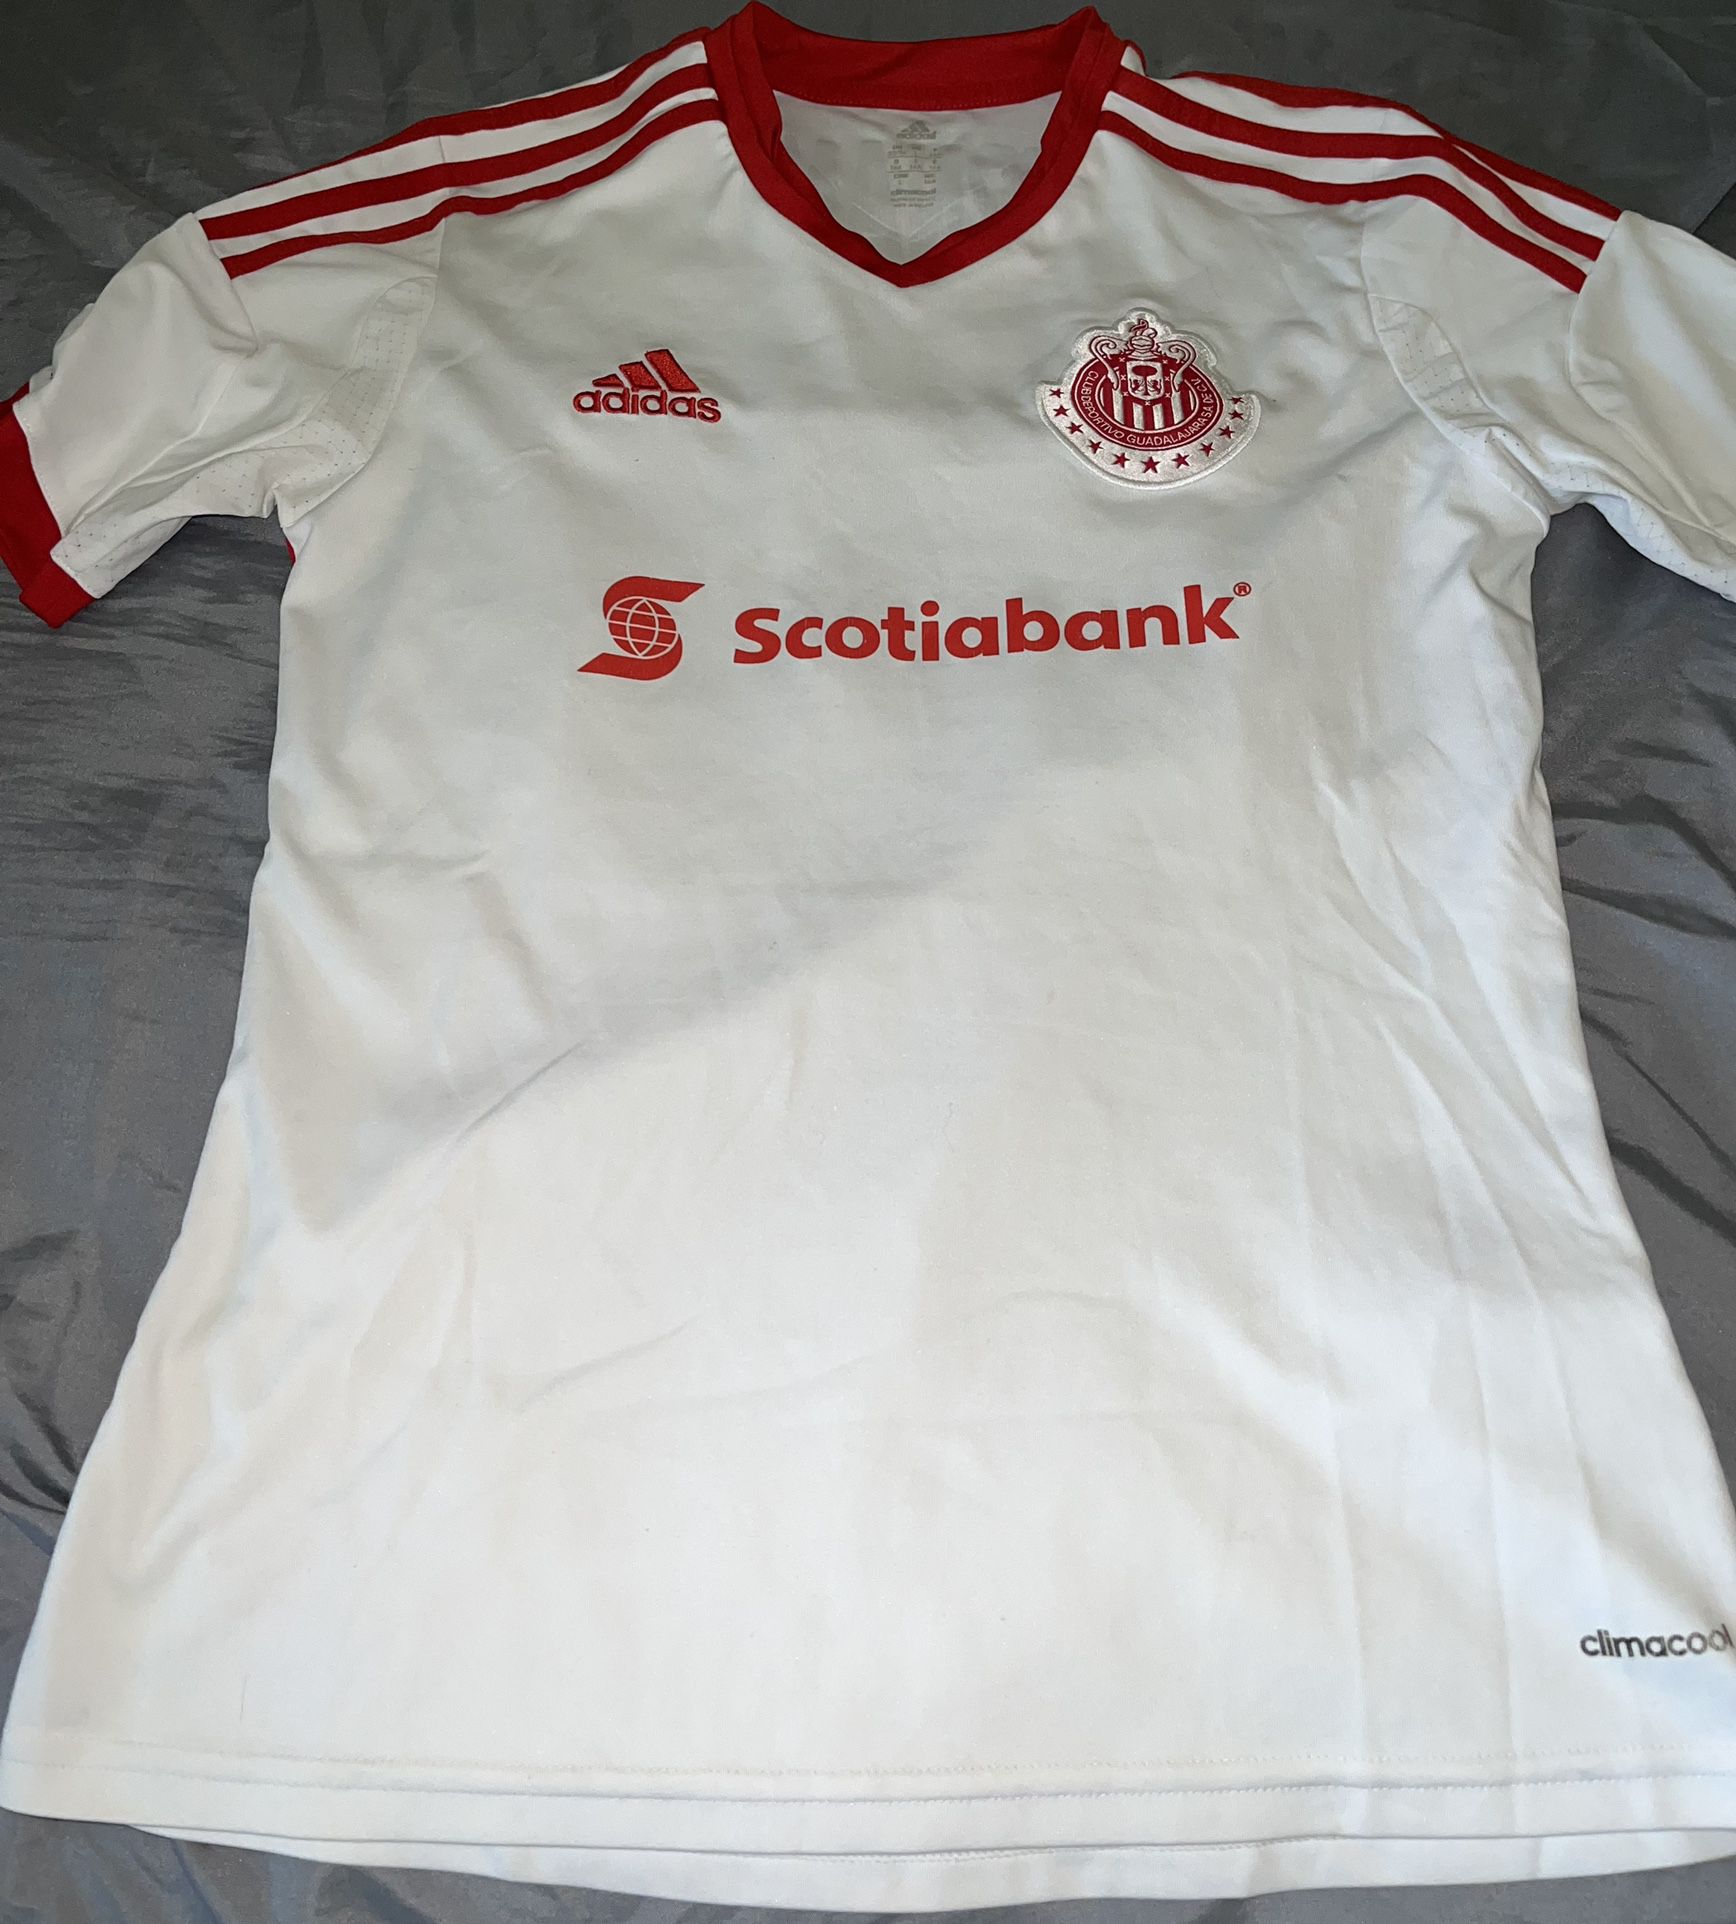 RED ADIDAS SOCCER JERSEY SIZE SMALL (YOUTH) GOOD CONDITION